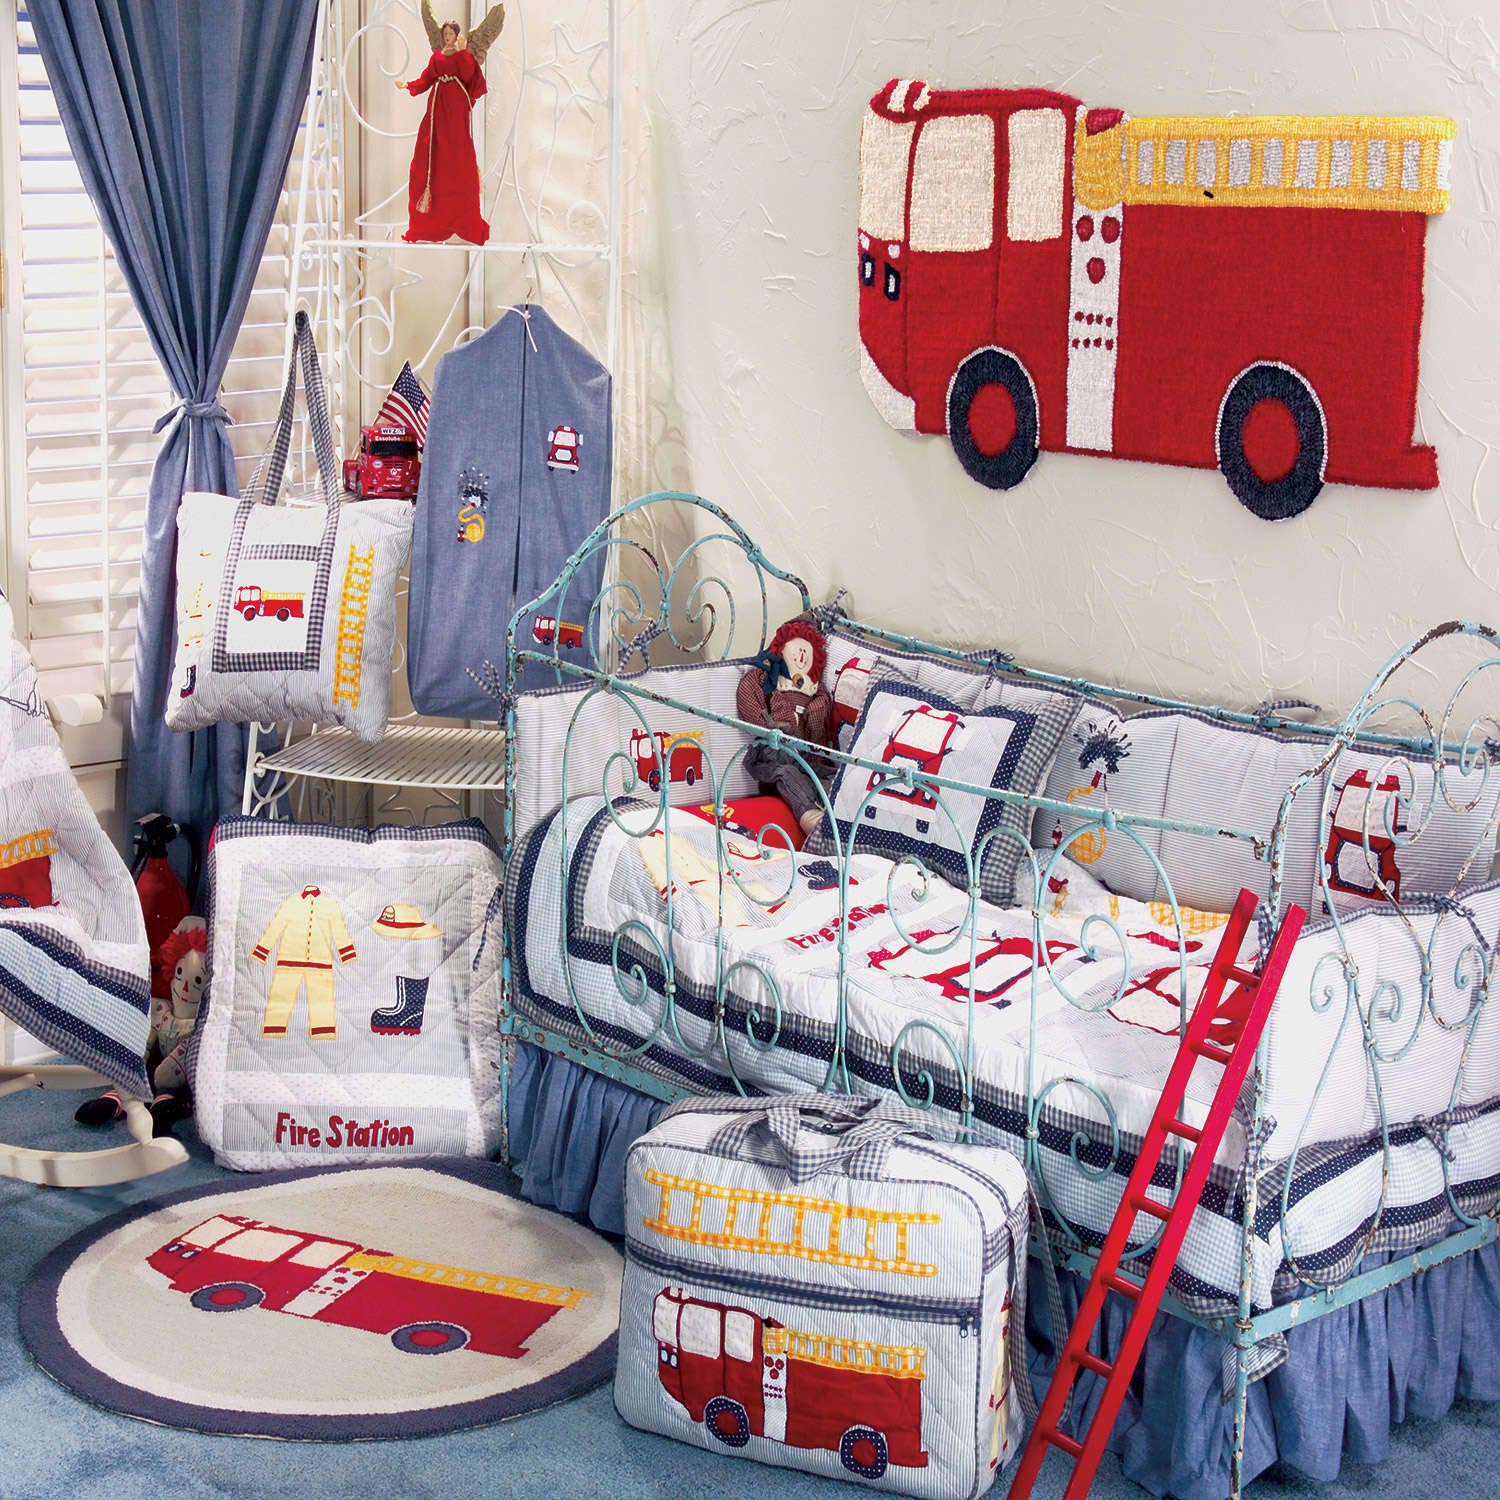 Styled Baby Bedding Crowded Styled Baby Boy Crib Bedding With White Red And Blue Splash Covering The Bedspread Completed With Red Ladder Kids Room Enchanting Baby Boy Crib Bedding Applied In Colorful Baby Room